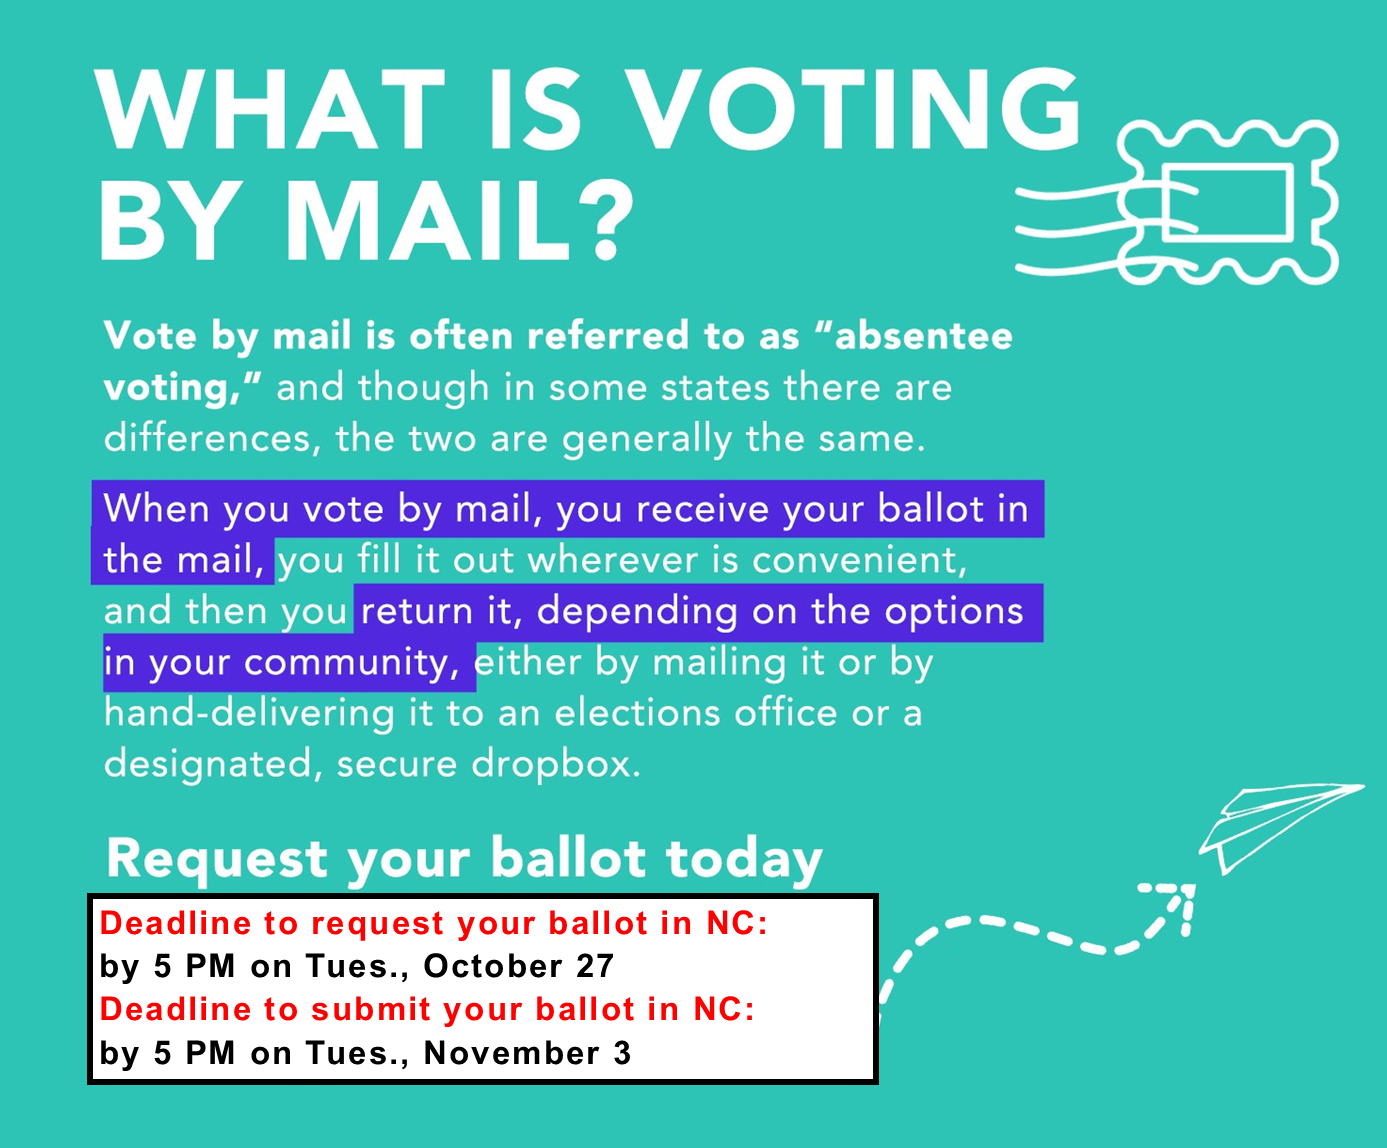 What is voting by mail? Vote by mail is often referred to as "absentee voting," and though in some states there are differences, the two are generally the same. When you vote by mail, you receive your ballot in the mail, you fill it out wherever is convenient, and then you return it, depending on the options in your community, either by mailing it or by hand-delivering it to an elections office or a designated, secure dropbox. Request your ballot today. Deadline to request your ballot in NC: by 5 PM on Tue…